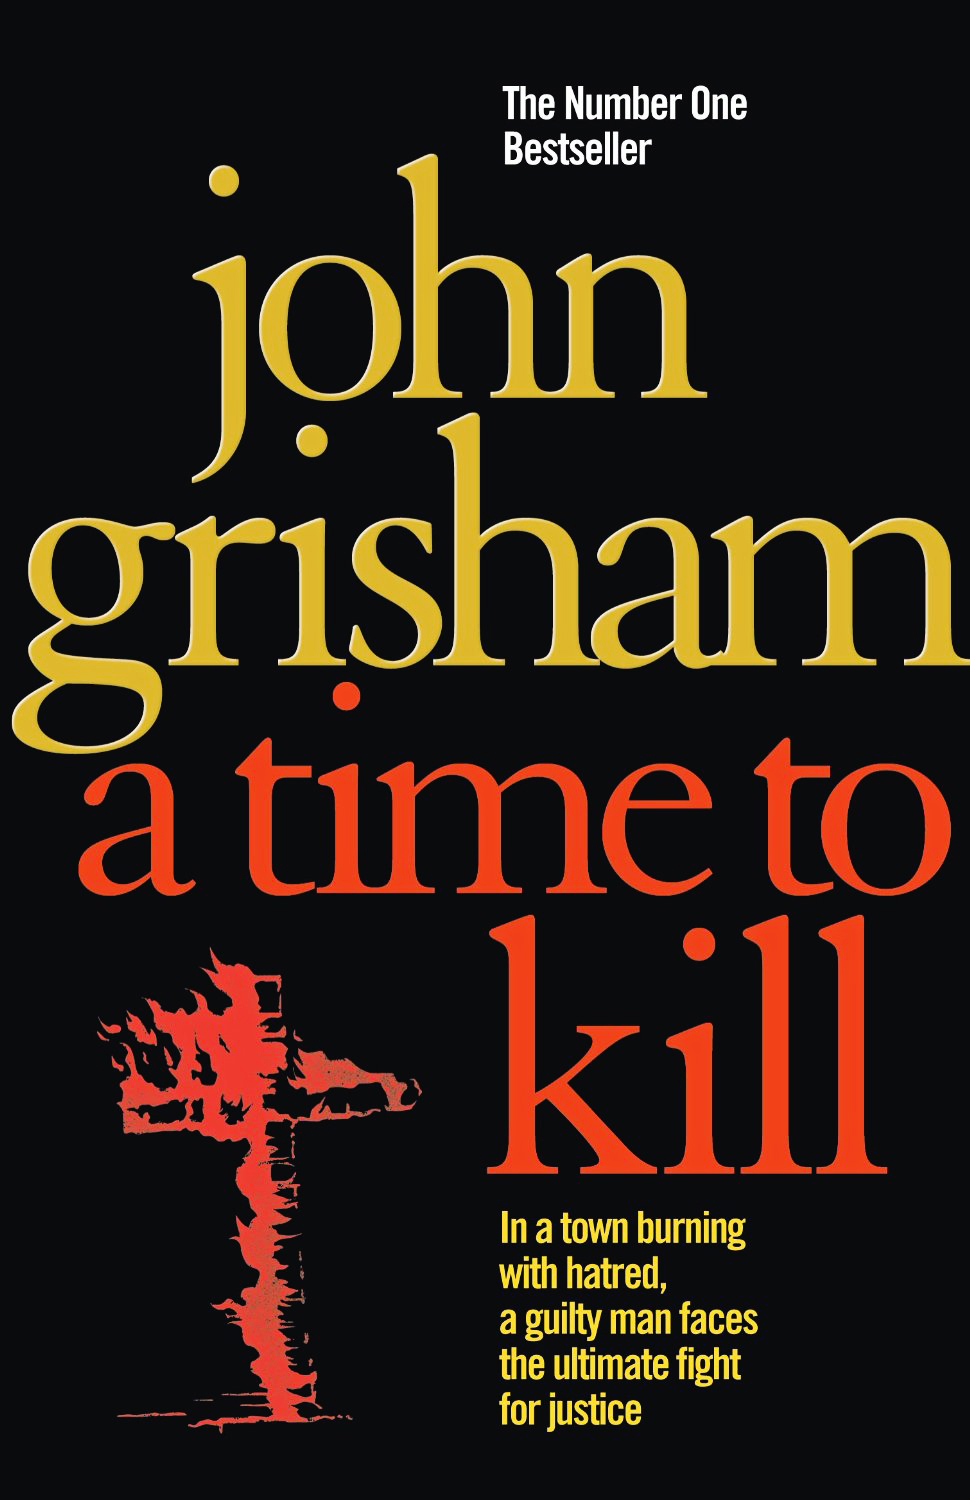 1989: John Grisham's first novel, "A Time to Kill," is a legal suspense thriller that was adapted into a film of the same name in 1996.